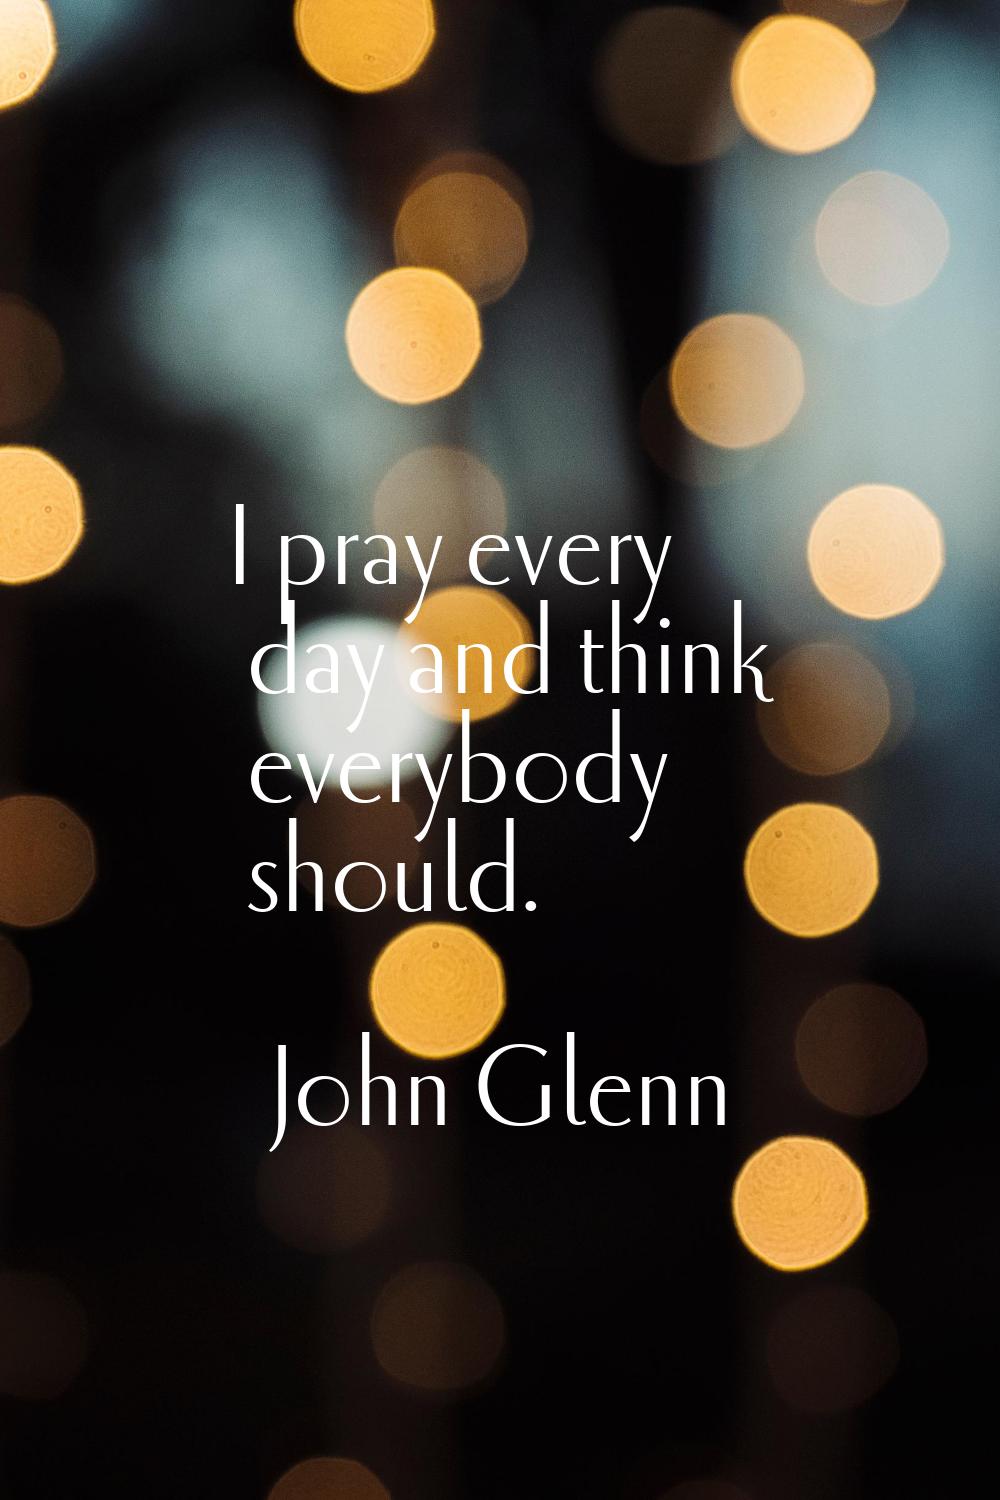 I pray every day and think everybody should.